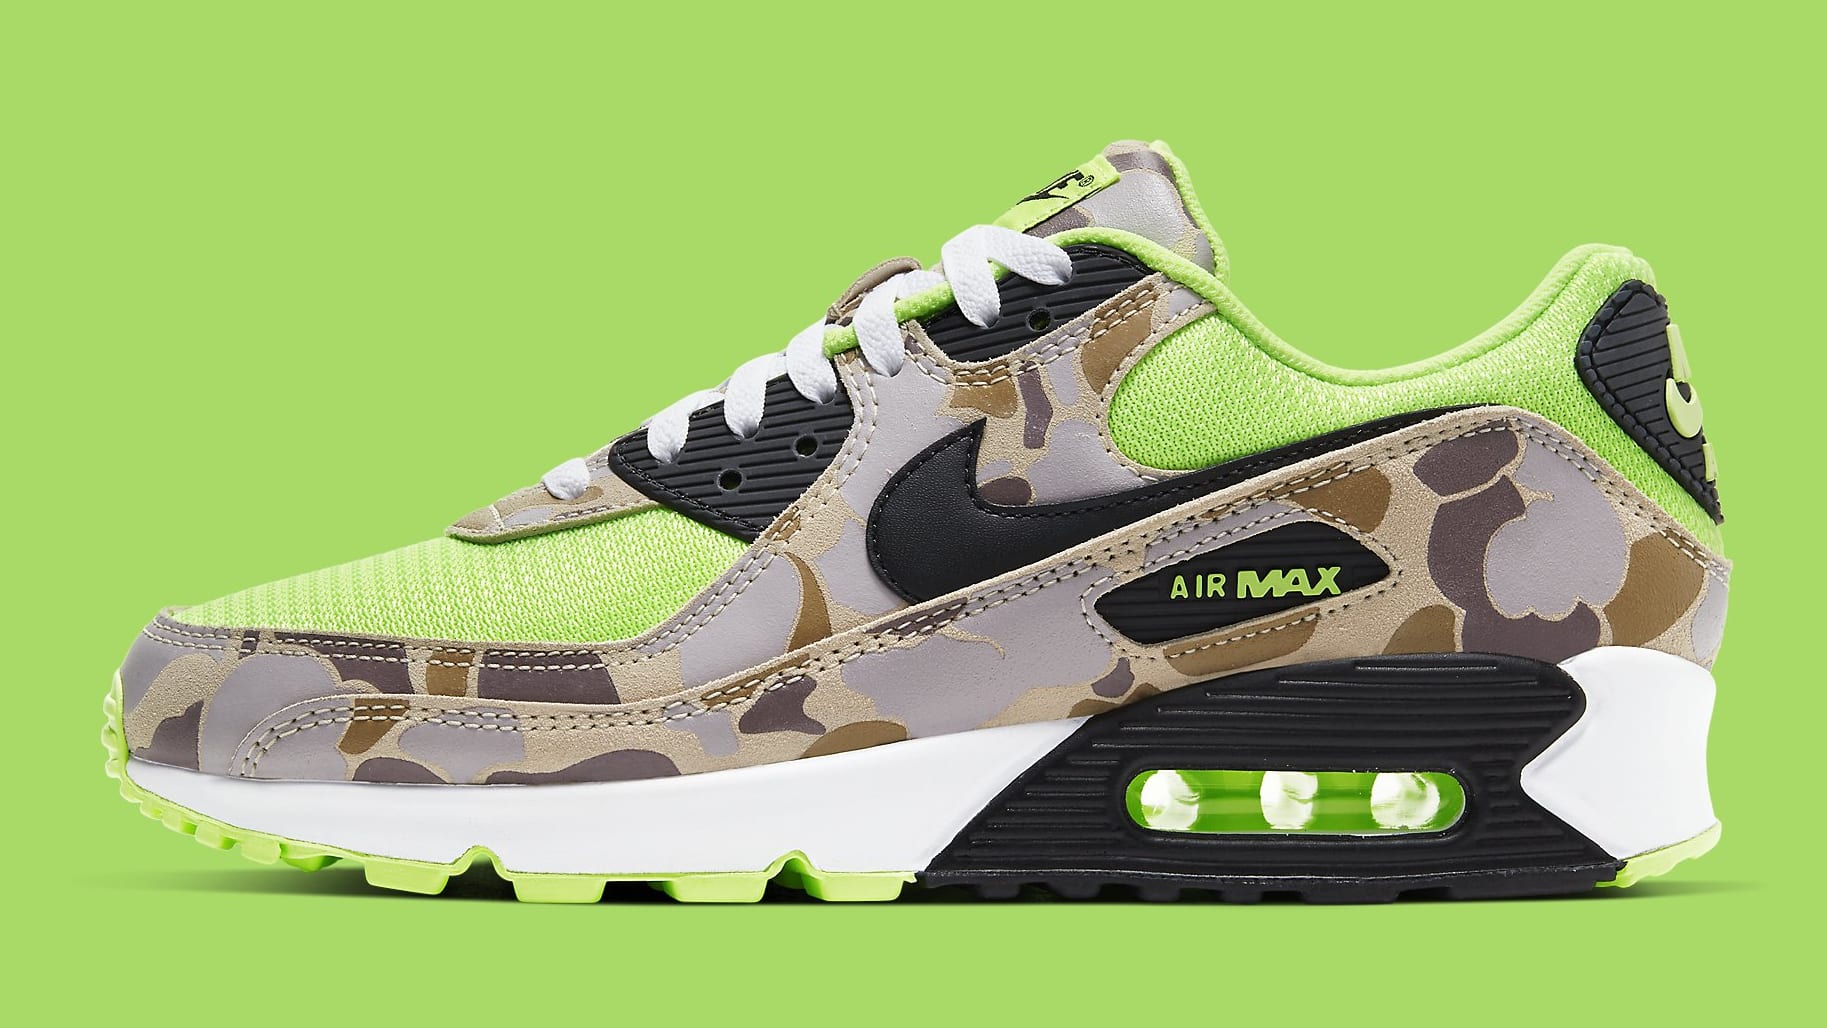 Nike Air Max 90 Volt Duck Camo Ghost Green Release Date CW4039-300 Profile